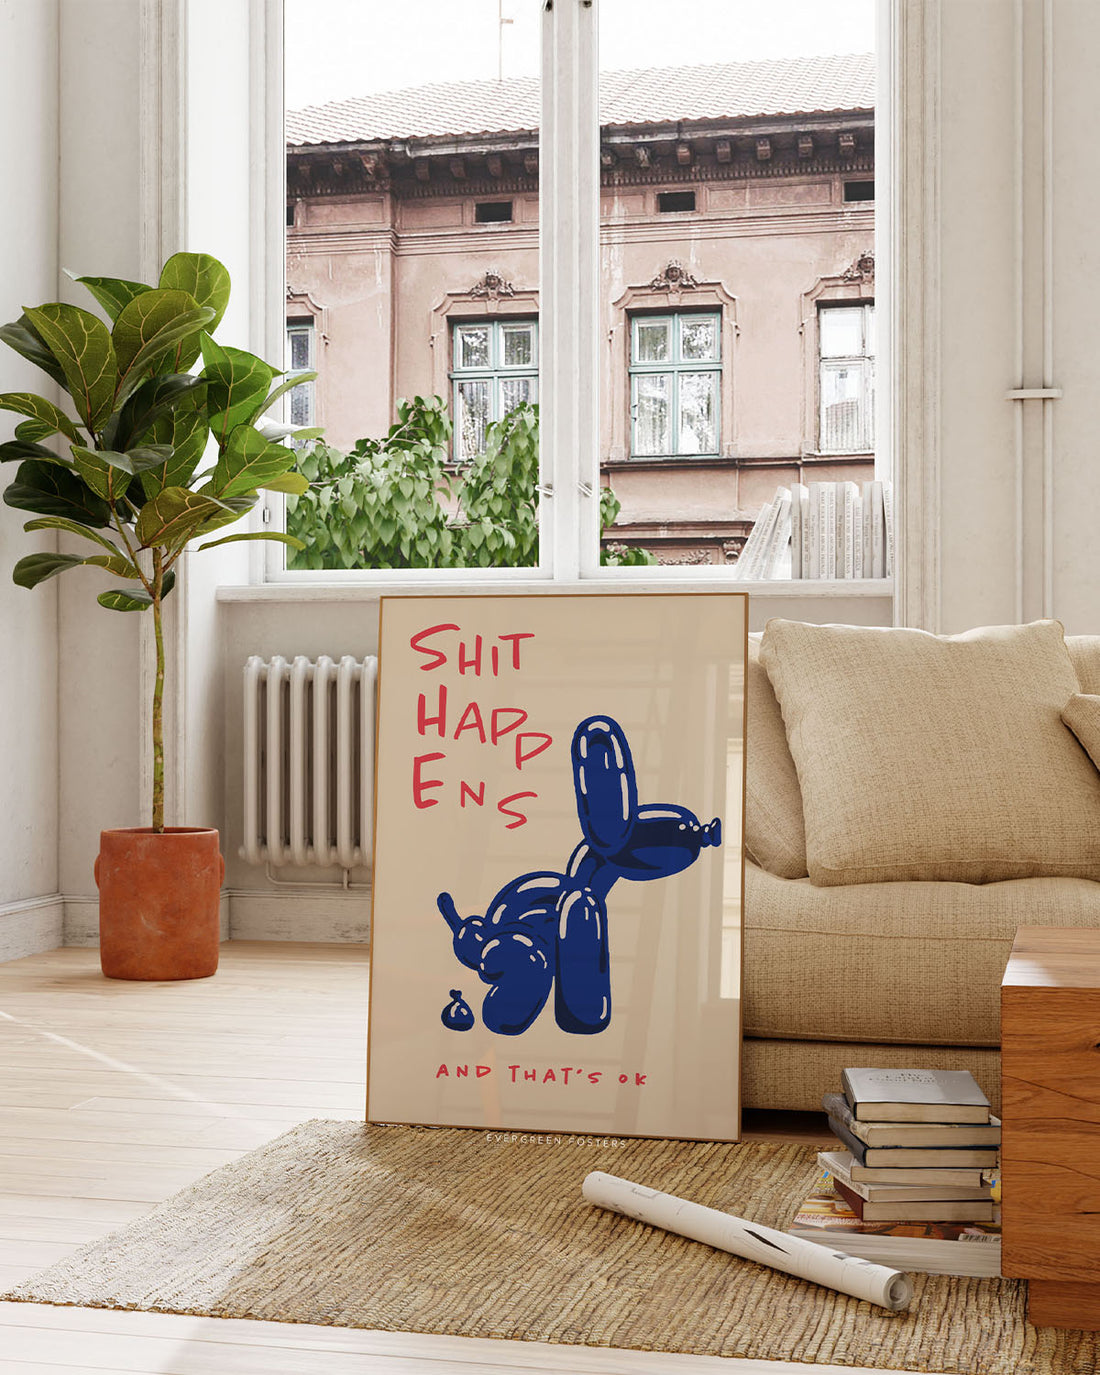 Blue Balloon Dog Poster with quote "Shit Happens and That's ok"